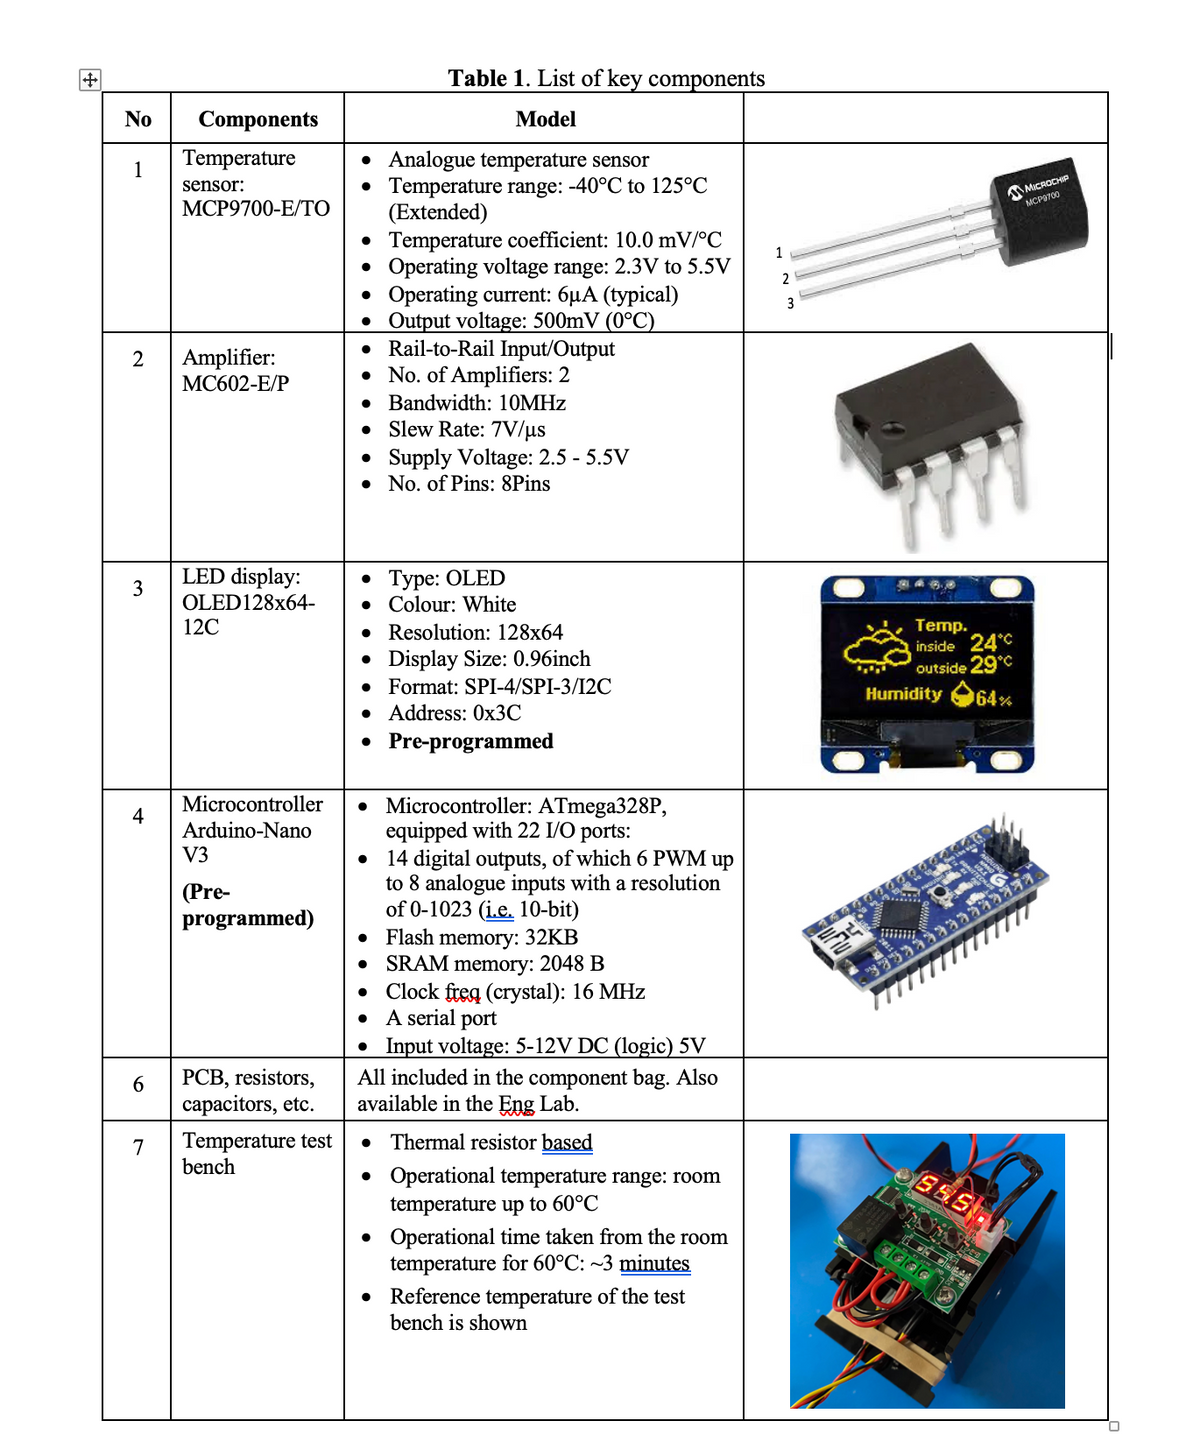 +
No
1
2
3
4
6
7
Components
Temperature
sensor:
MCP9700-E/TO
Amplifier:
MC602-E/P
LED display:
OLED128x64-
12C
Microcontroller
Arduino-Nano
V3
(Pre-
programmed)
PCB, resistors,
capacitors, etc.
Temperature test
bench
Table 1. List of key components
Model
• Analogue temperature sensor
● Temperature range: -40°C to 125°C
(Extended)
• Temperature coefficient: 10.0 mV/°C
• Operating voltage range: 2.3V to 5.5V
• Operating current: 6µA (typical)
● Output voltage: 500mV (0°C)
• Rail-to-Rail Input/Output
No. of Amplifiers: 2
Bandwidth: 10MHz
• Slew Rate: 7V/μs
• Supply Voltage: 2.5 -5.5V
No. of Pins: 8Pins
Type: OLED
Colour: White
• Resolution: 128x64
• Display Size: 0.96inch
• Format: SPI-4/SPI-3/I2C
• Address: 0x3C
• Pre-programmed
• Microcontroller: ATmega328P,
equipped with 22 I/O ports:
14 digital outputs, of which 6 PWM up
to 8 analogue inputs with a resolution
of 0-1023 (i.e. 10-bit)
• Flash memory: 32KB
●
●
SRAM memory: 2048 B
• Clock freq (crystal): 16 MHz
●
A serial port
Input voltage: 5-12V DC (logic) 5V
All included in the component bag. Also
available in the Eng Lab.
Thermal resistor based
• Operational temperature range: room
temperature up to 60°C
• Operational time taken from the room
temperature for 60°C: ~3 minutes
• Reference temperature of the test
bench is shown
1
2
3
54
Temp.
inside 24°C
outside 29°C
64%
Humidity
www.
33333333
8.5.6.1.
HAAA
MICROCHIP
MCP9700